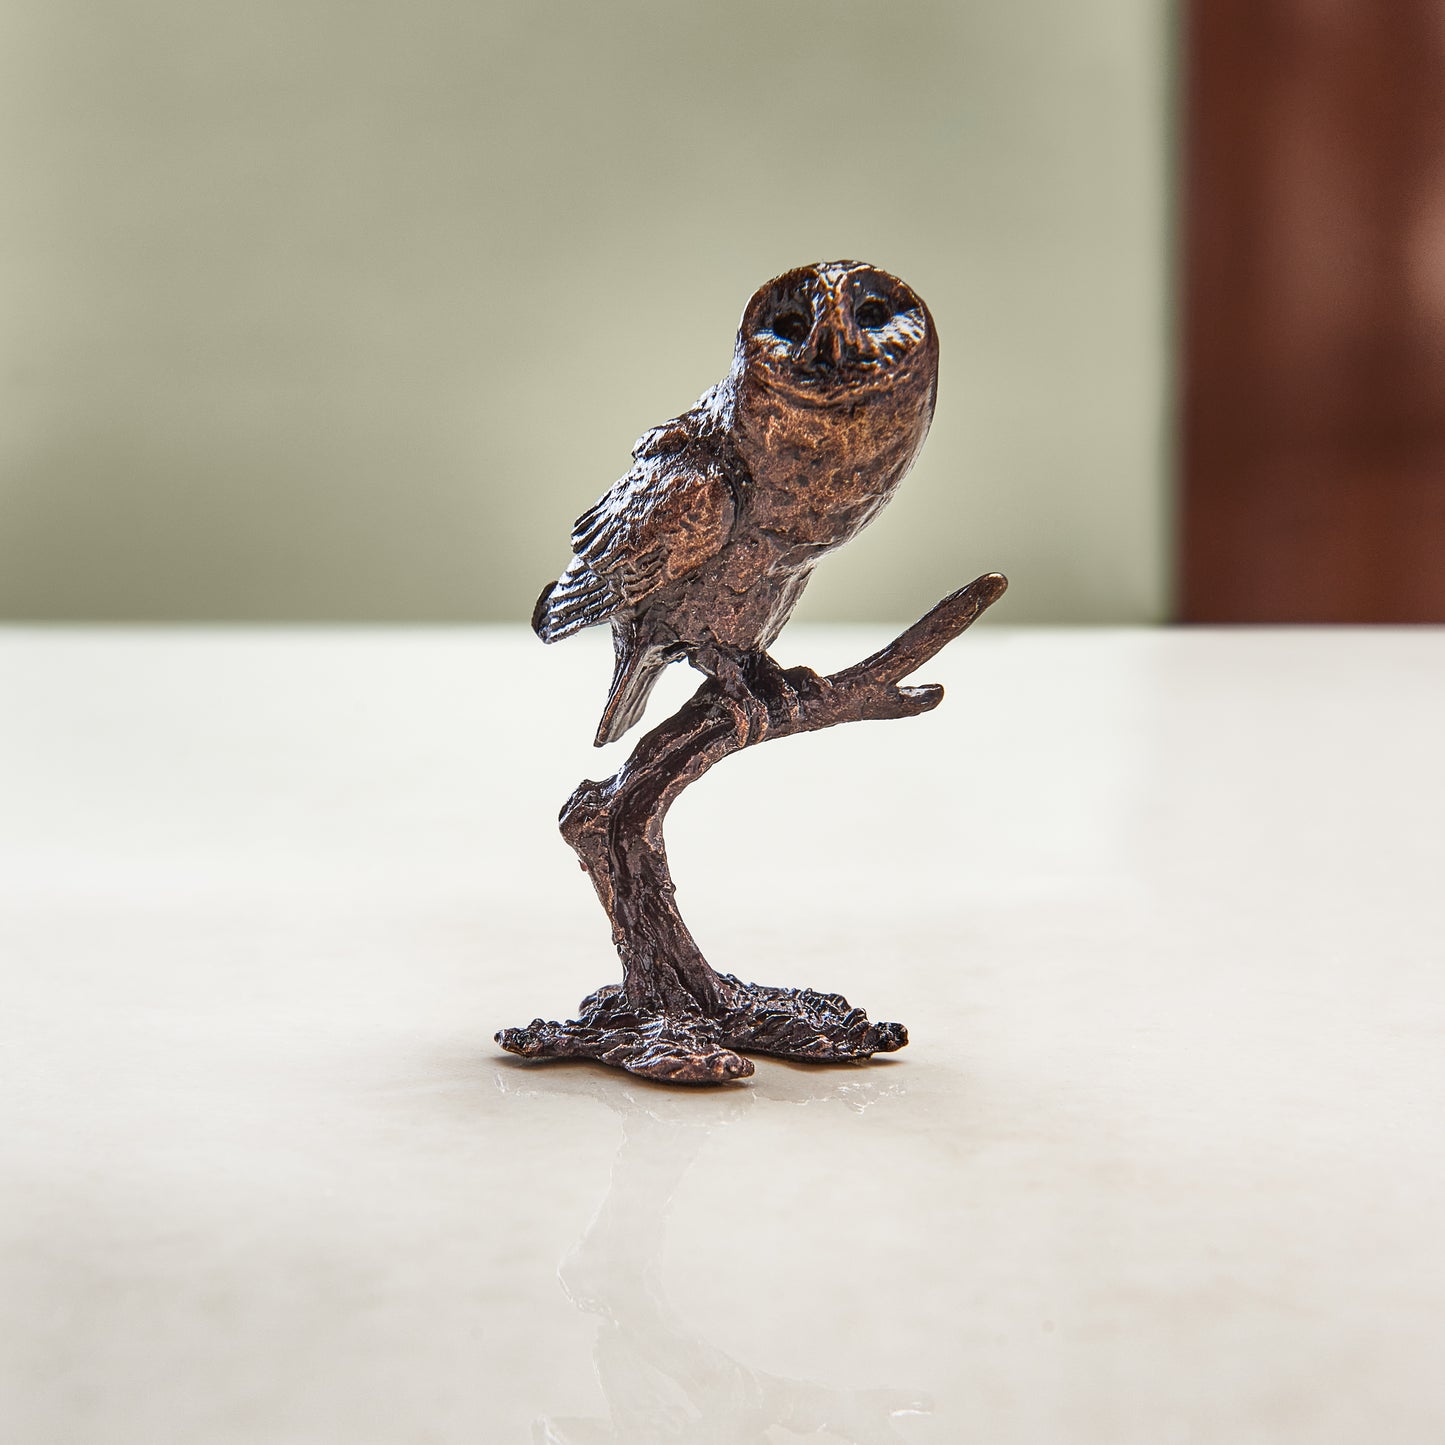 Miniature bronze figurine of a tawny owl perched on a branch. A perfect bronze anniversary gift.